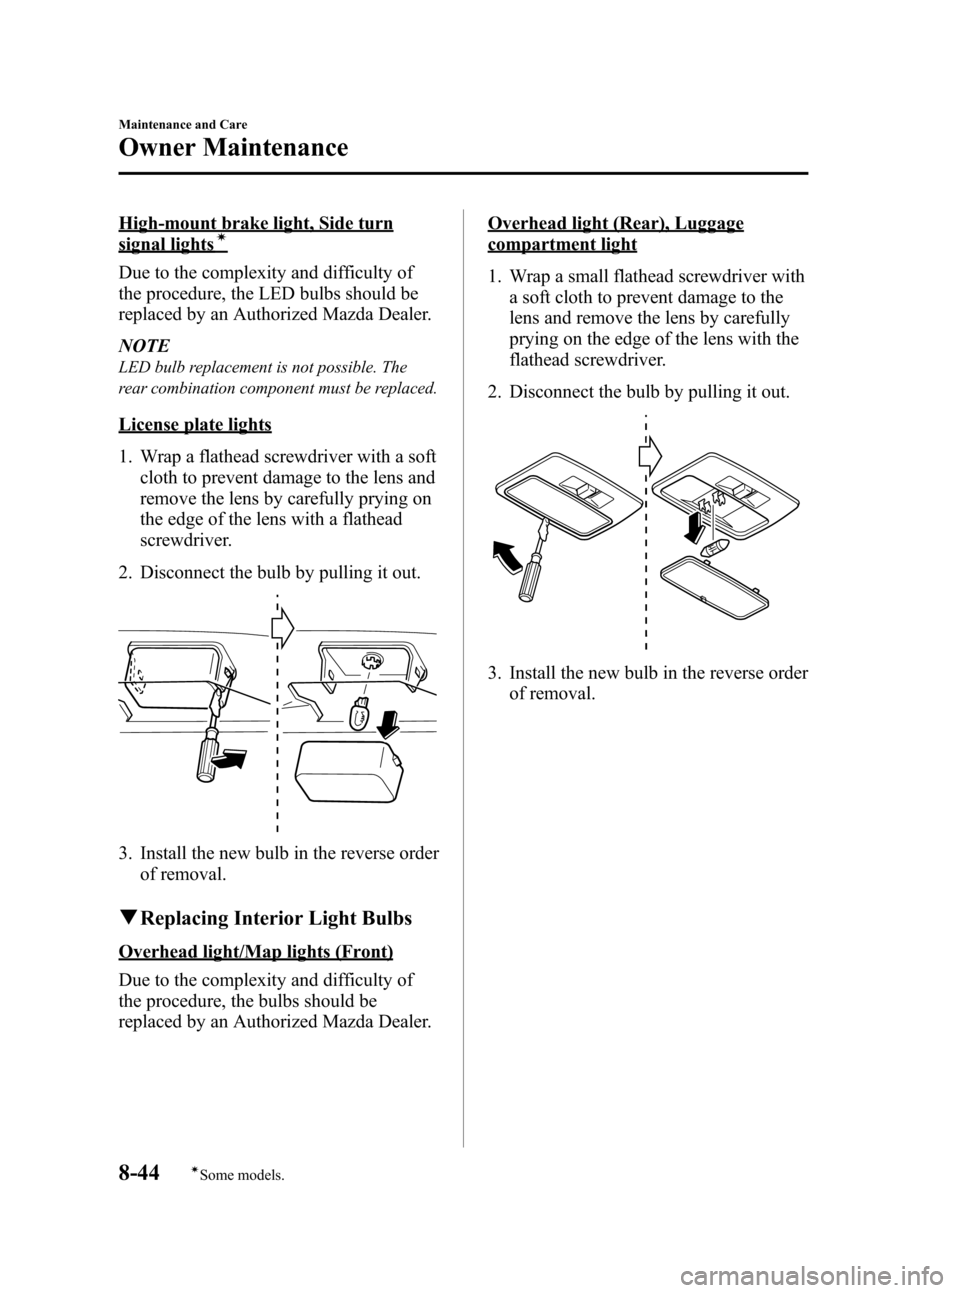 MAZDA MODEL CX-7 2009  Owners Manual (in English) Black plate (380,1)
High-mount brake light, Side turn
signal lightsí
Due to the complexity and difficulty of
the procedure, the LED bulbs should be
replaced by an Authorized Mazda Dealer.
NOTE
LED bu